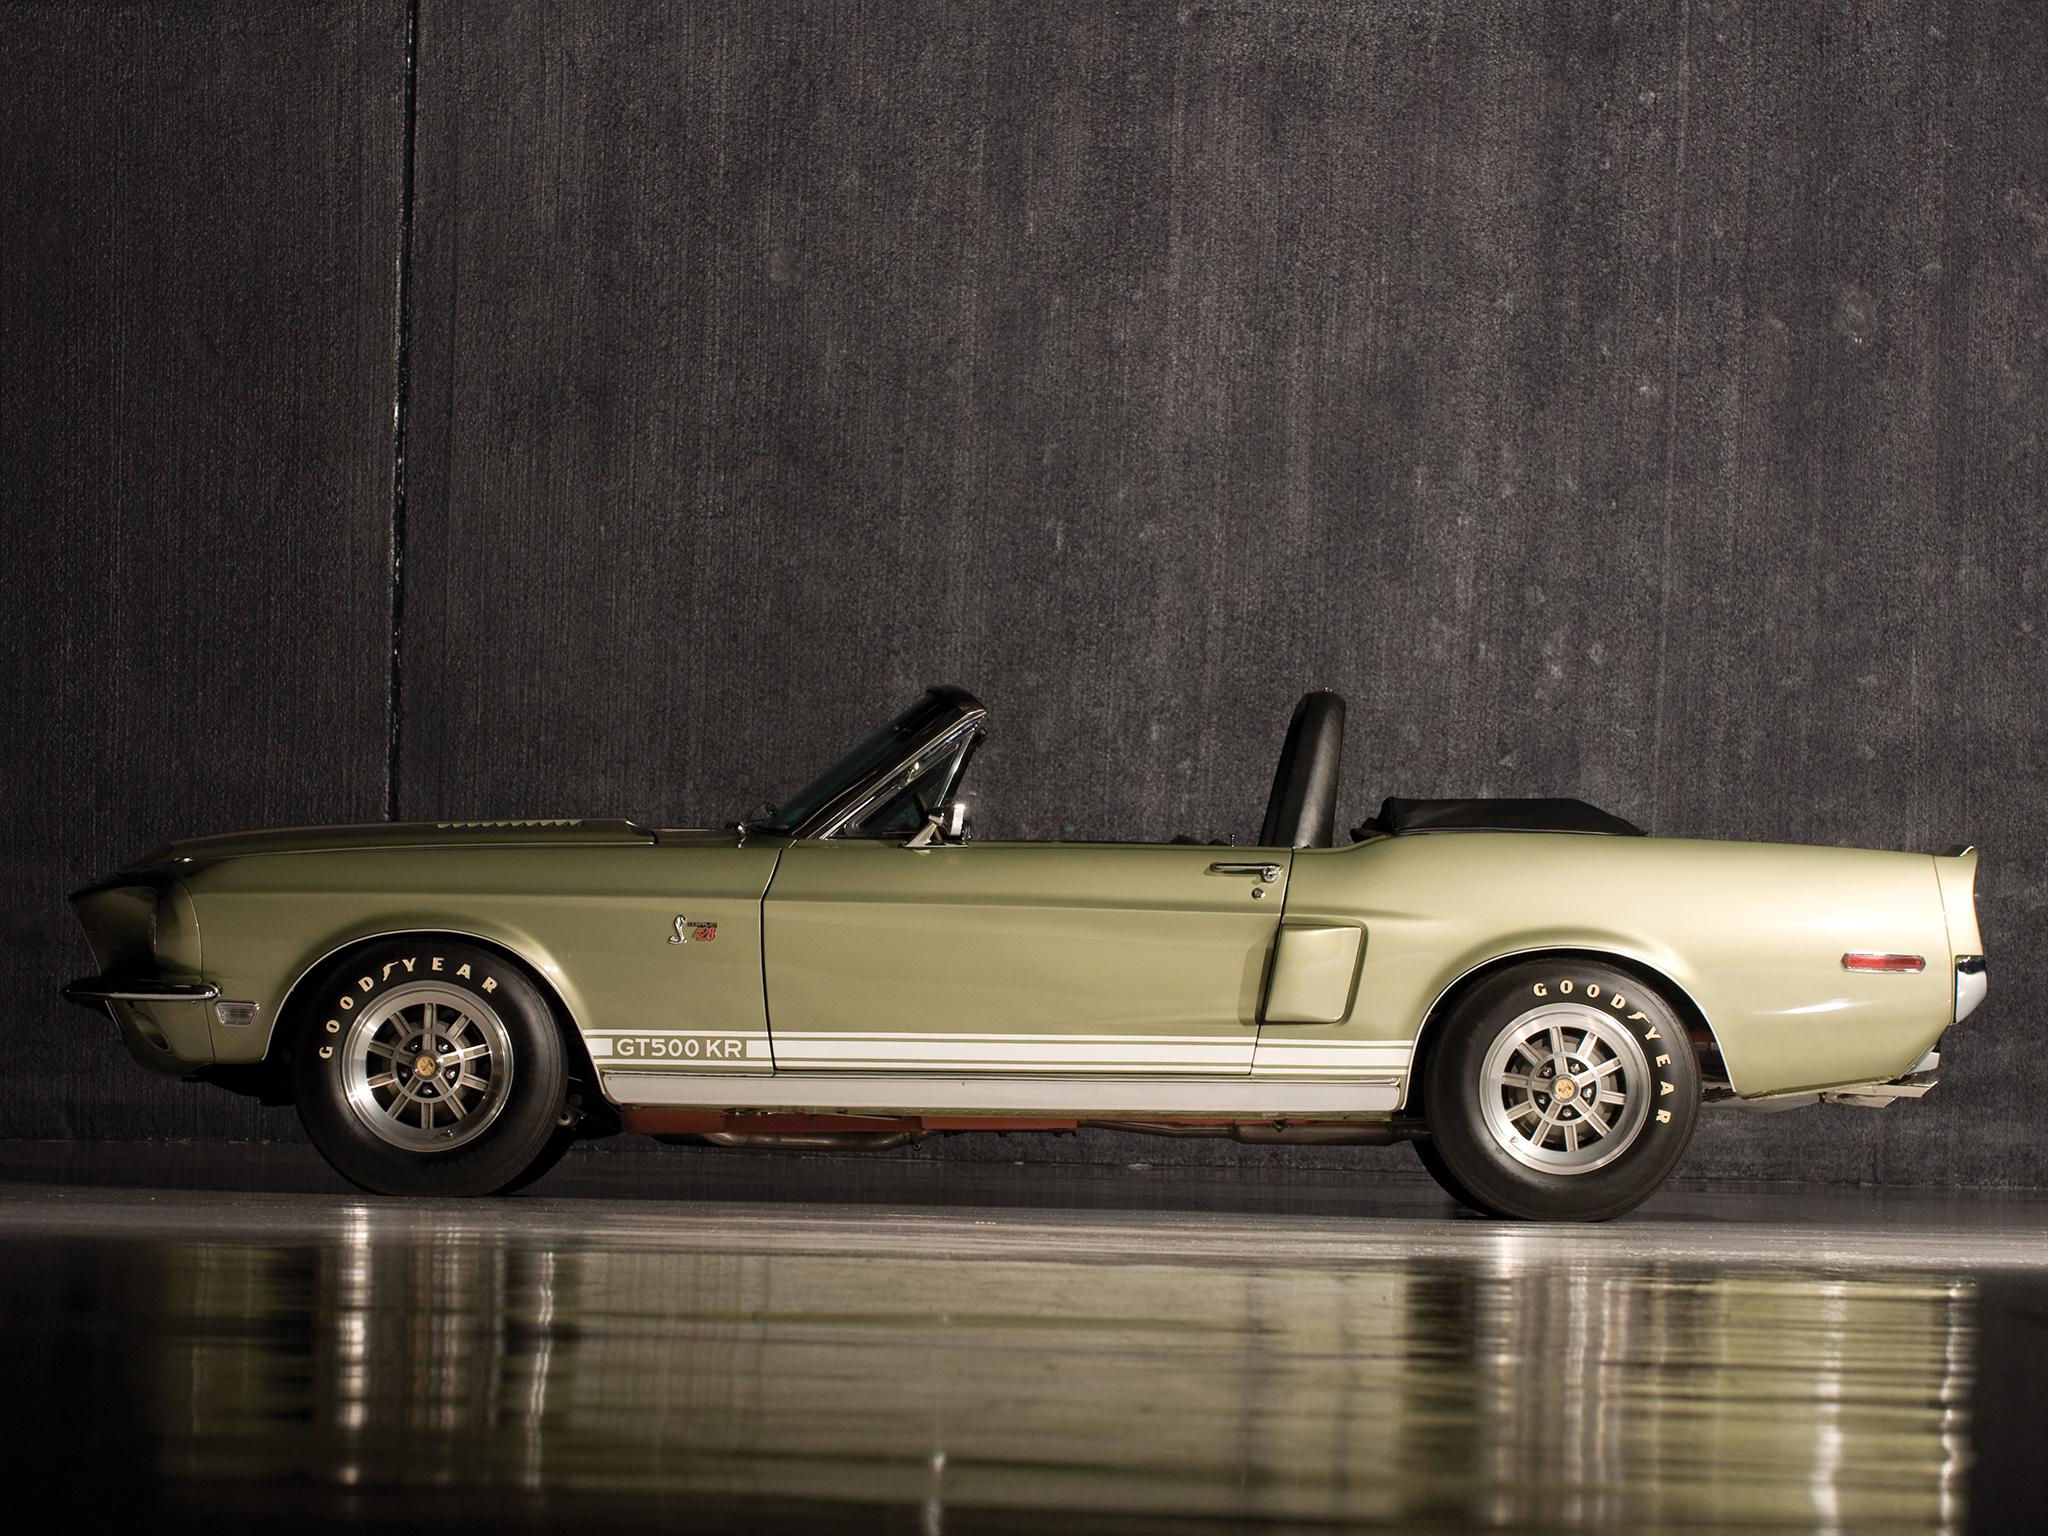 1968, Shelby, Gt500 kr, Gt500, Convertible, Ford, Mustang, Muscle, Classic, Fd Wallpaper